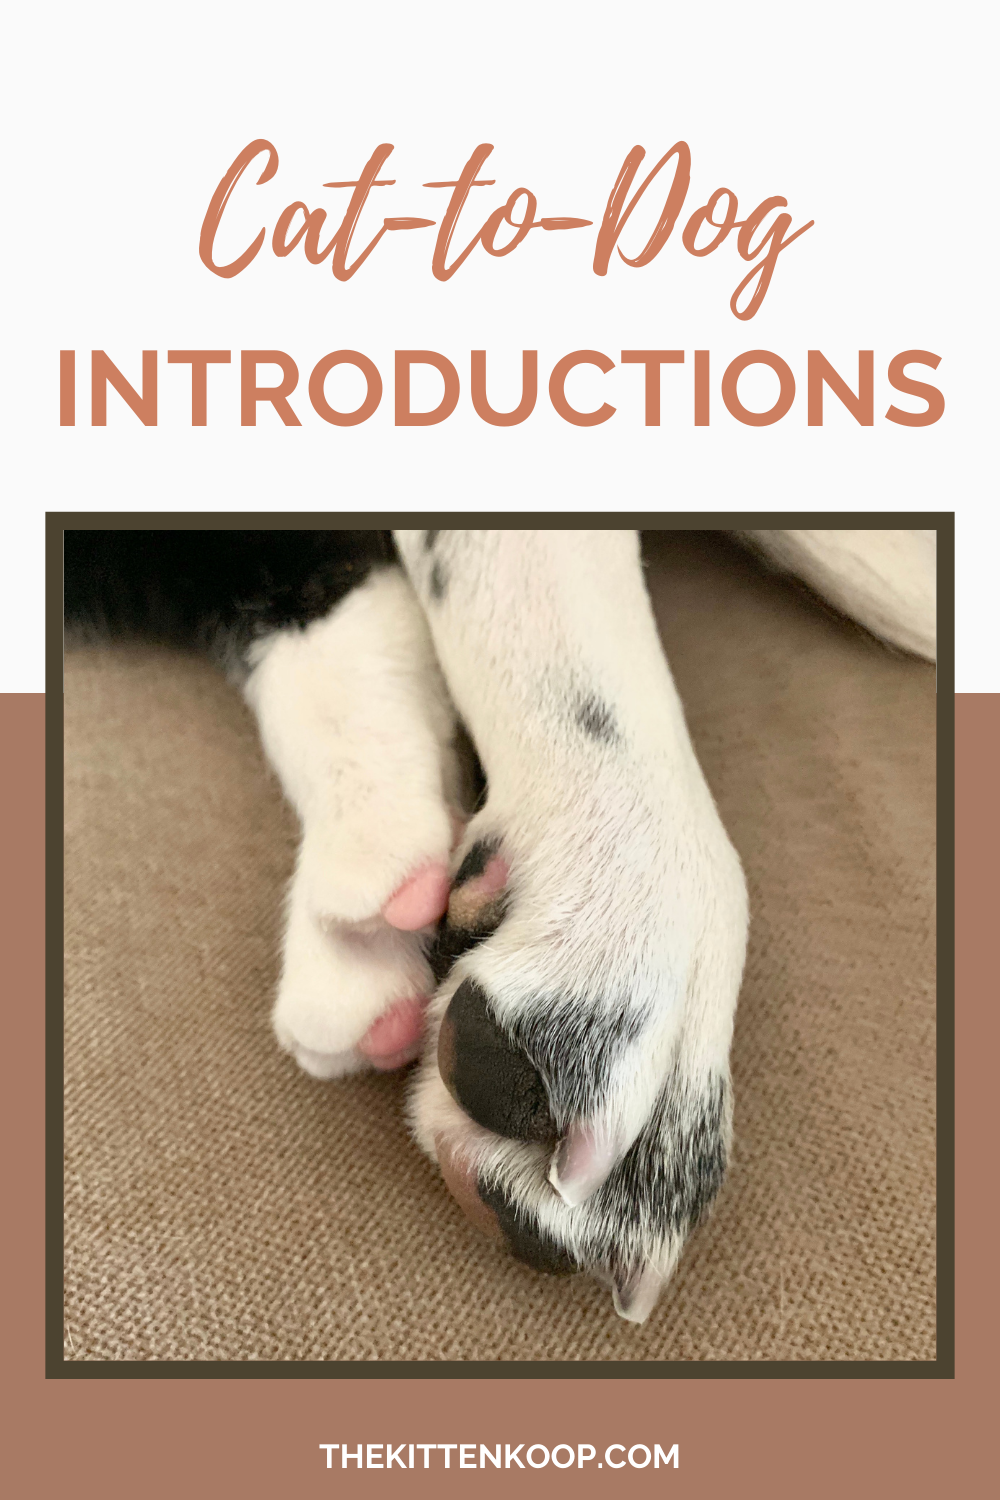 Cat-to-Dog Introductions: A Step-by-Step Guide